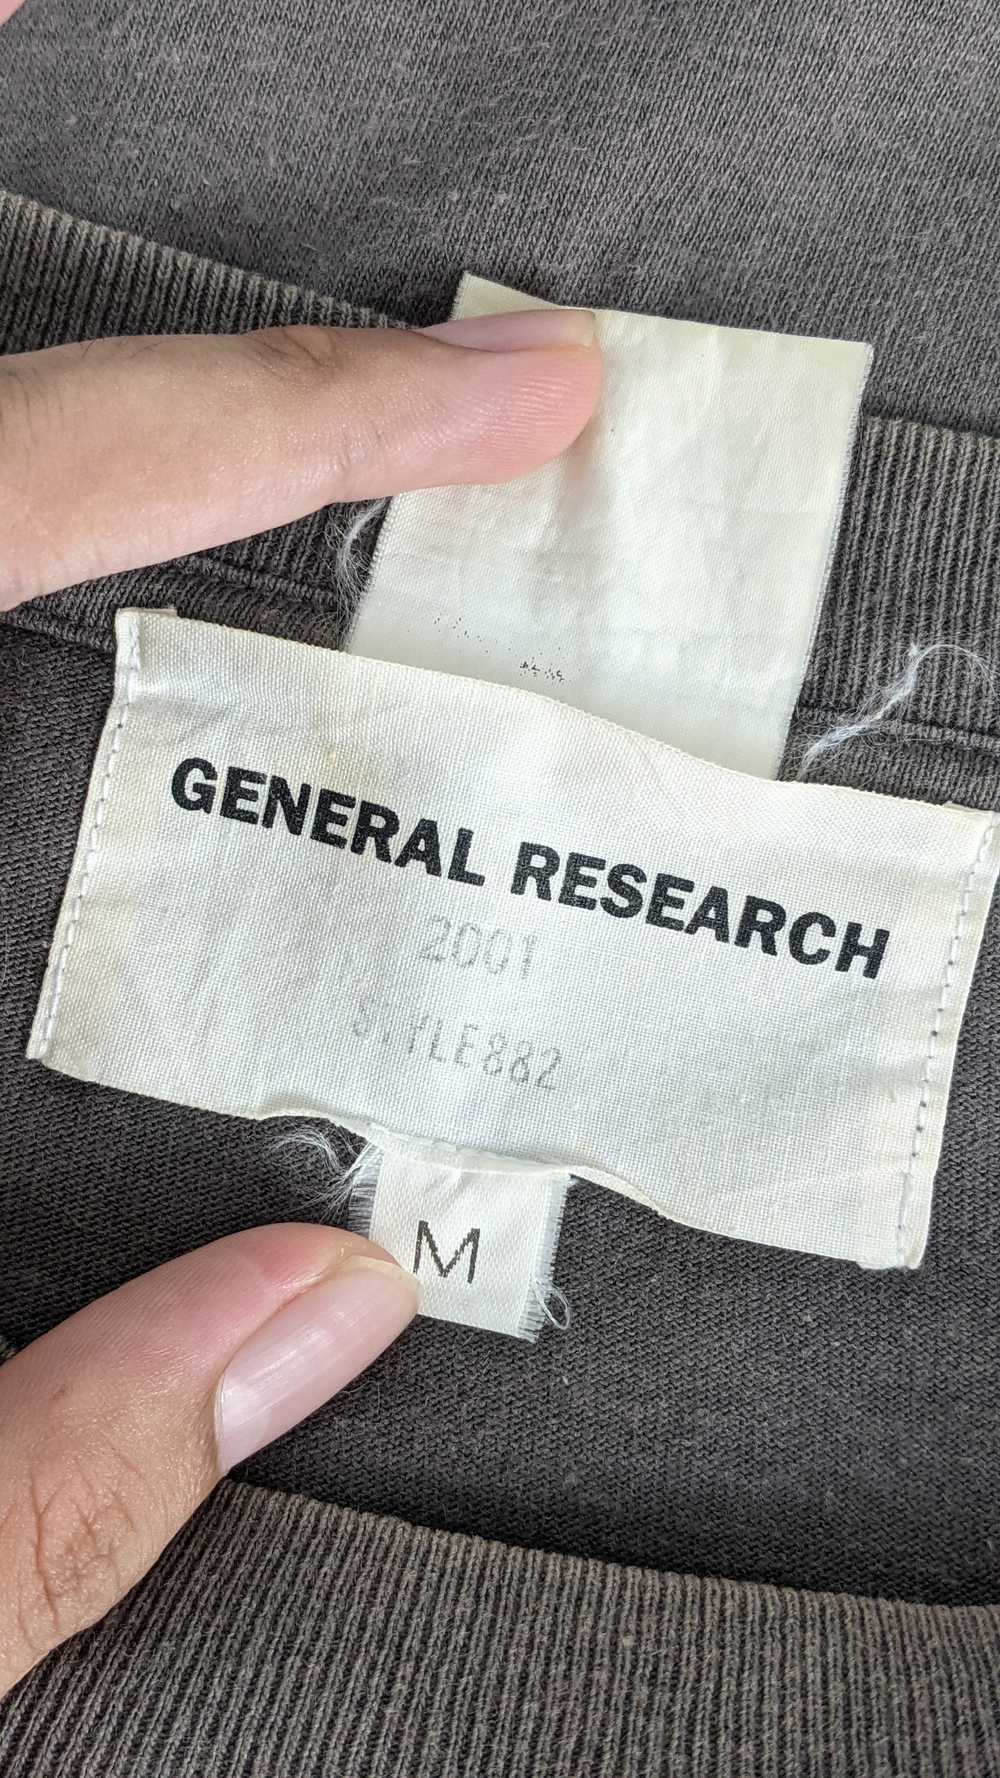 General Research 2001 shirt - image 5